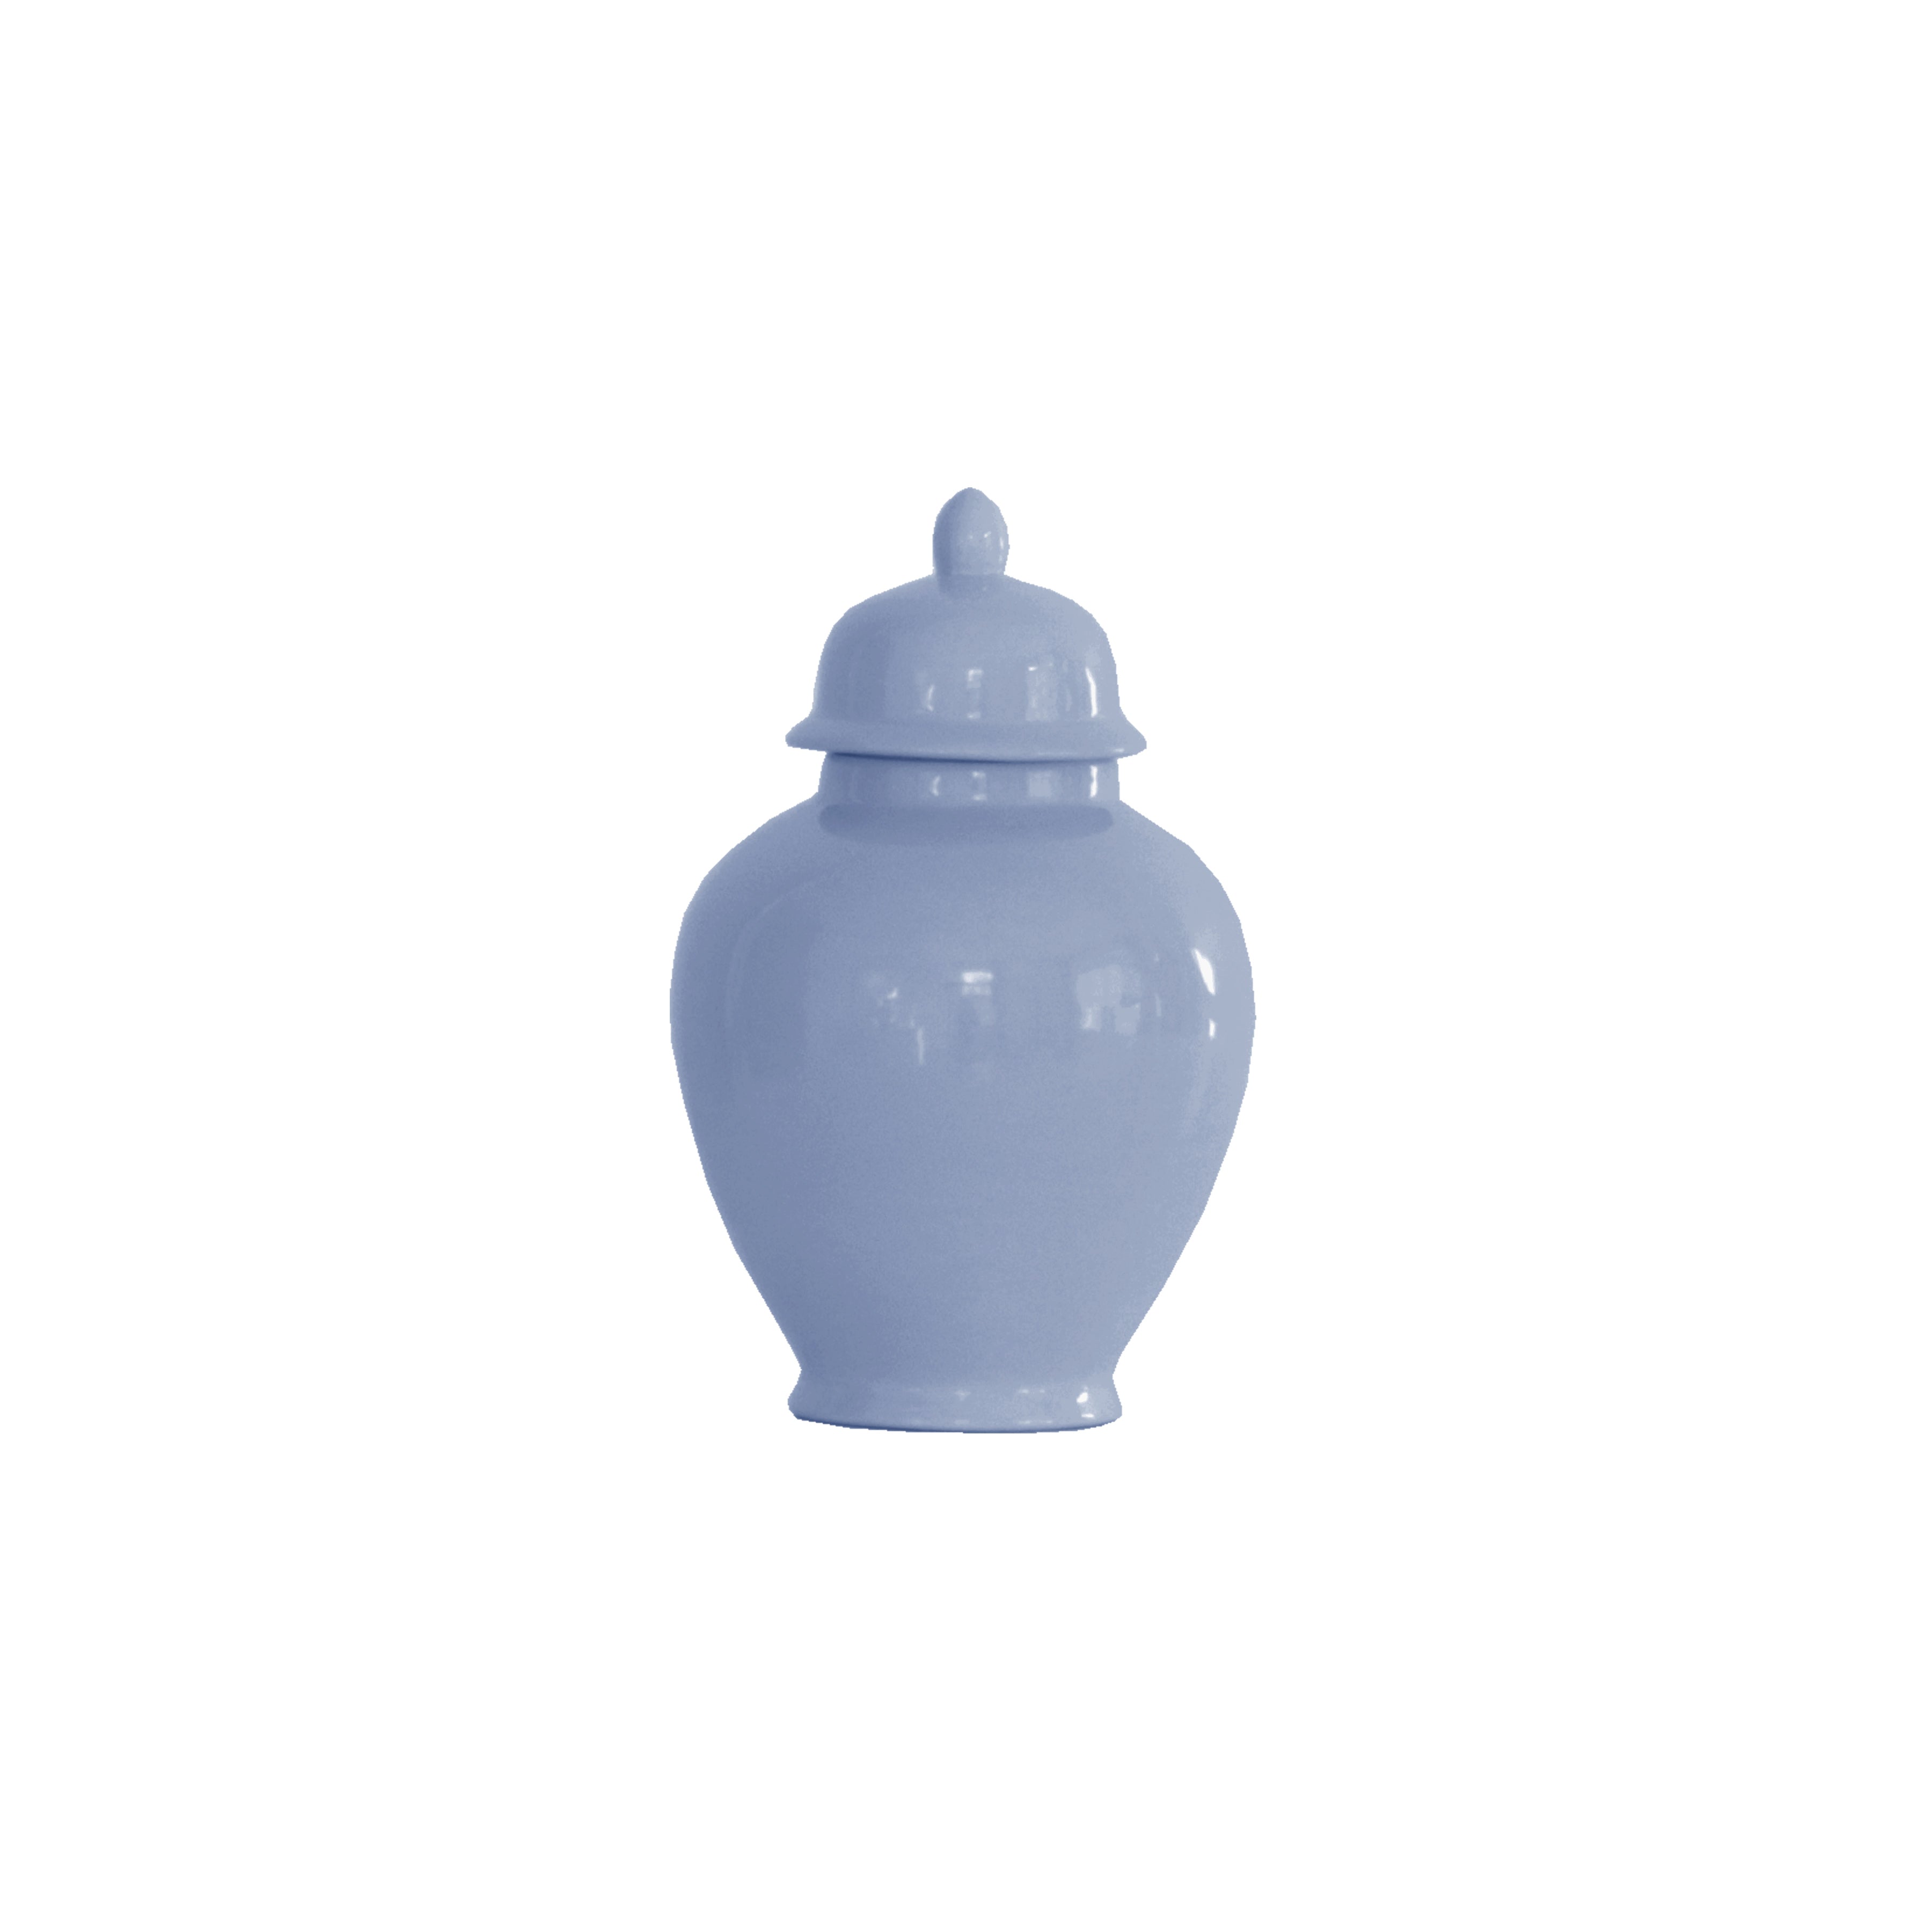 WHITE GINGER JAR WITH CREST – Consign & Design